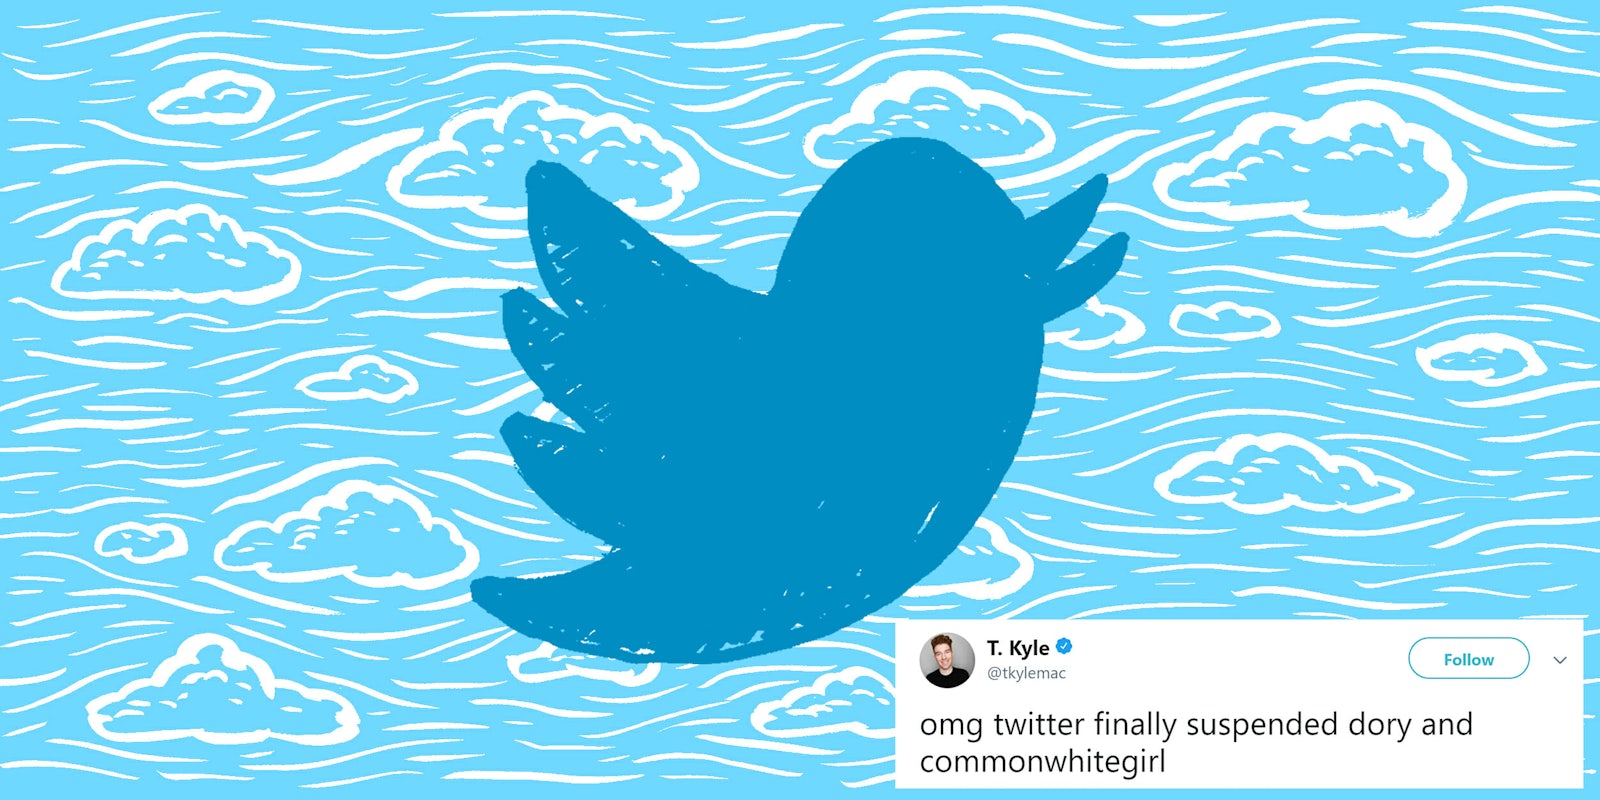 Twitter bird and cloud background with 'omg twitter finally suspended dory and commonwhitegirl' tweet